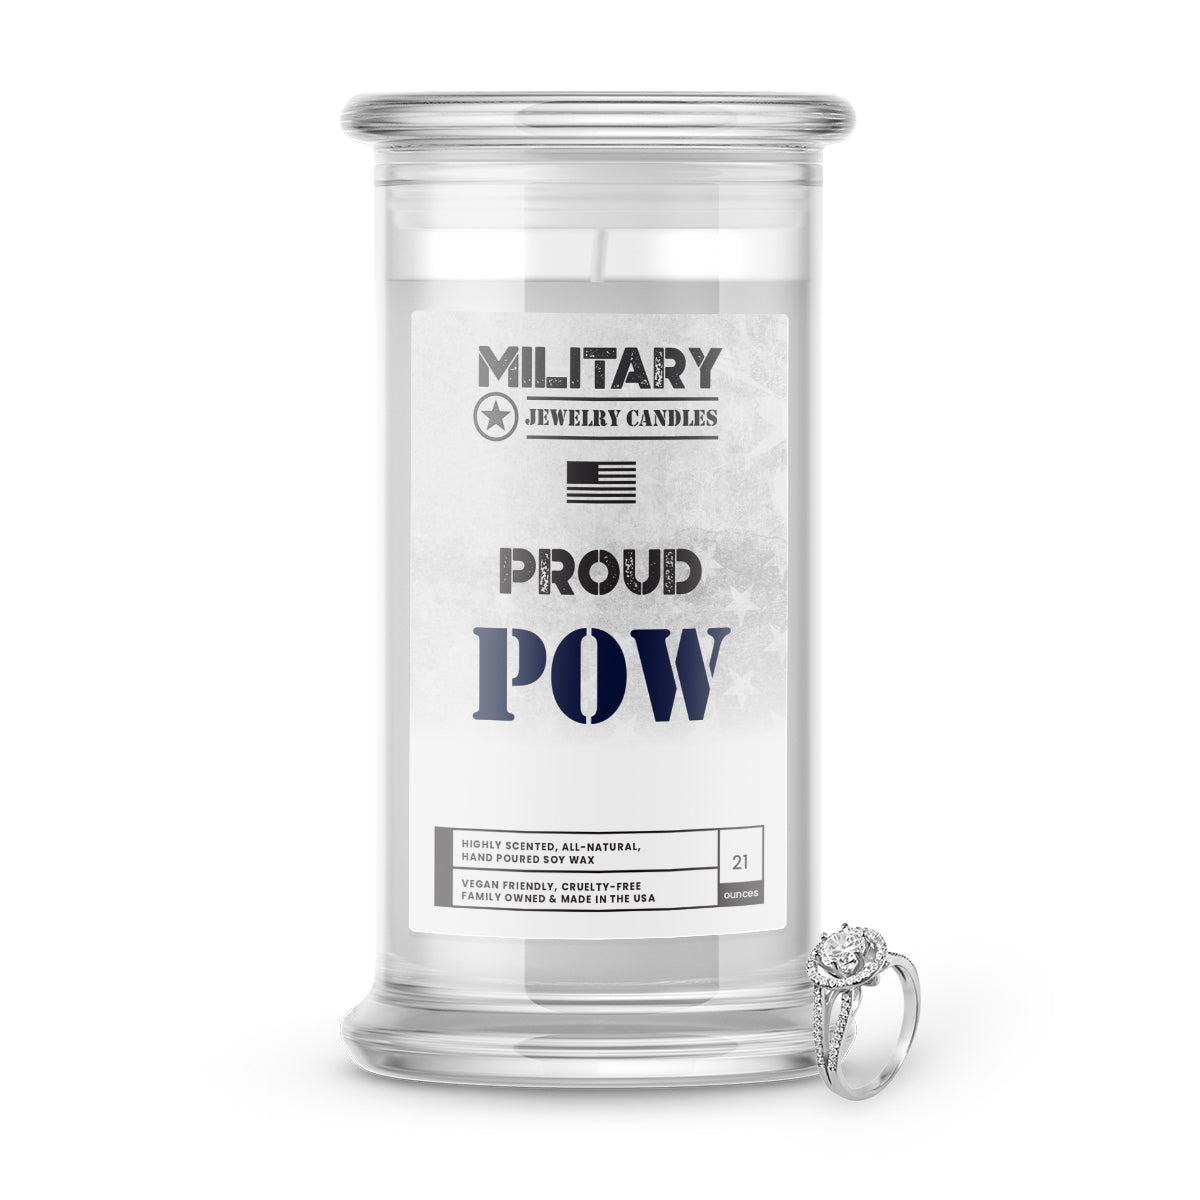 Proud POW | Military Jewelry Candles